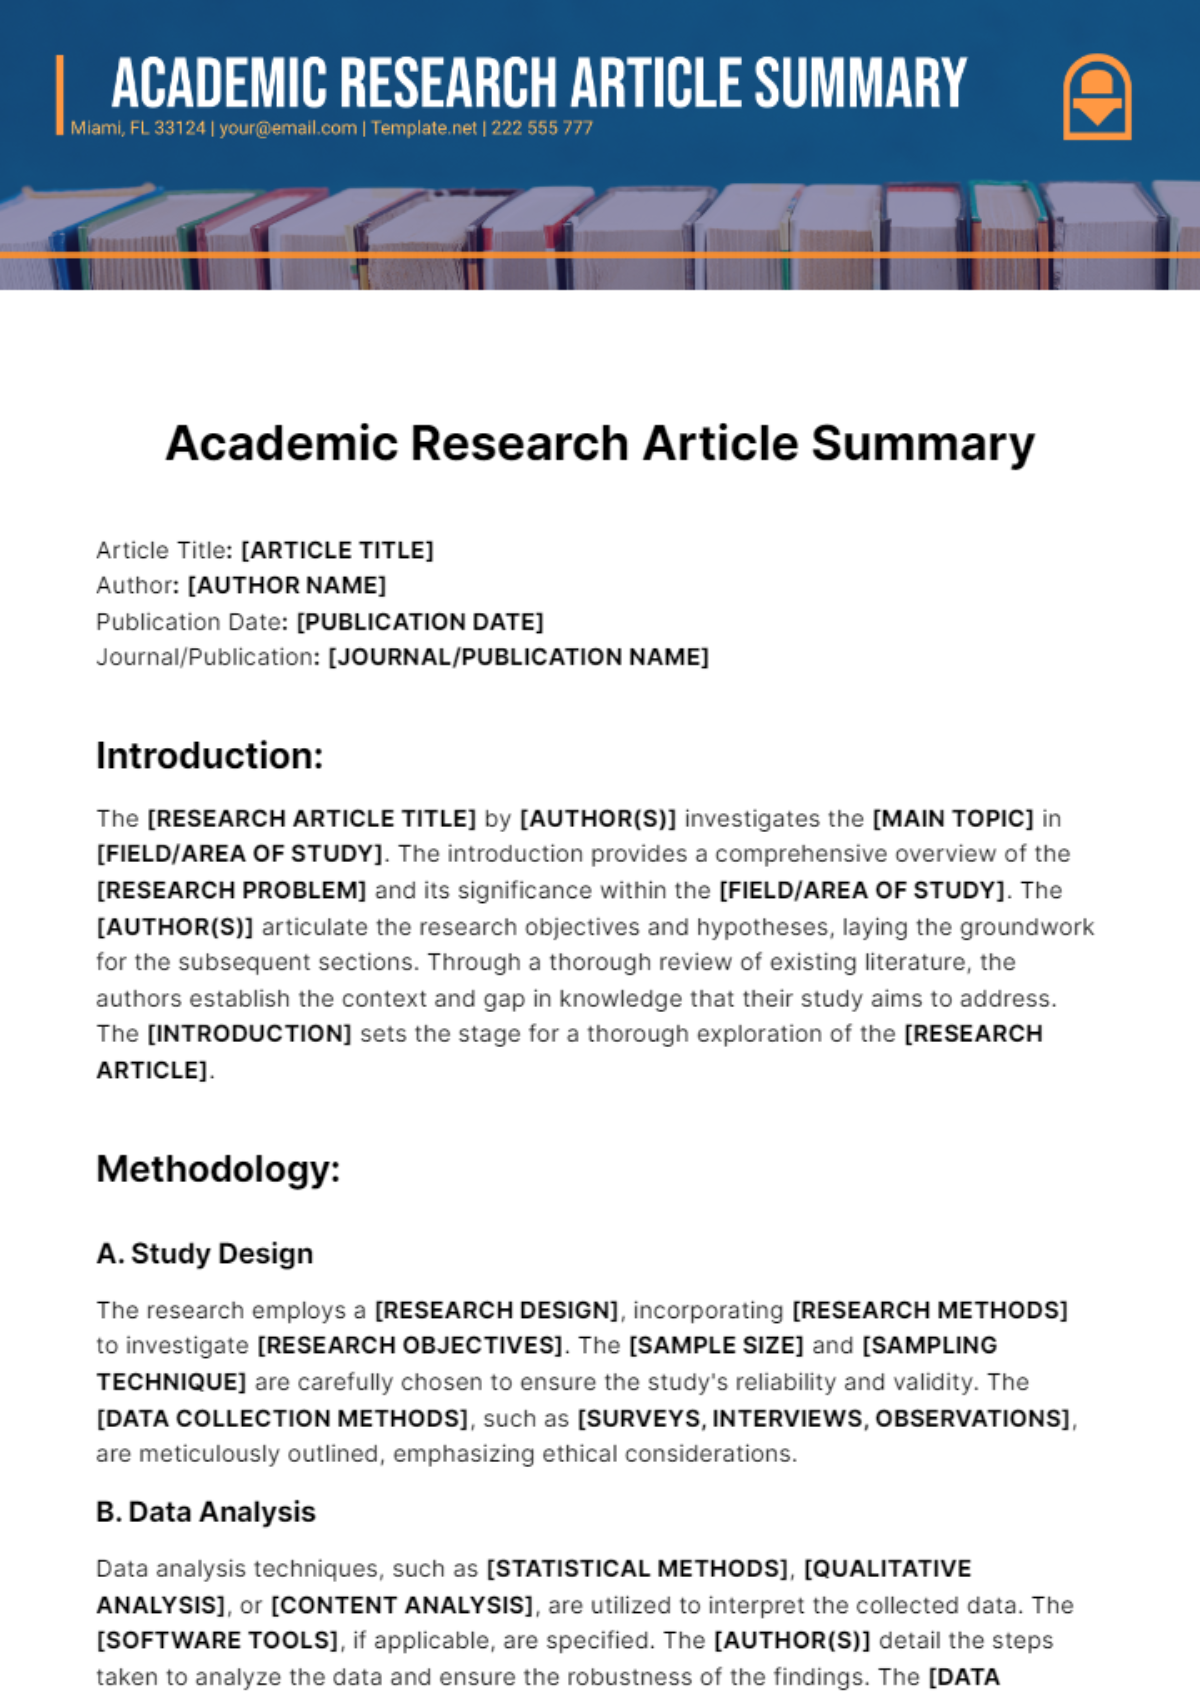 Academic Research Article Summary